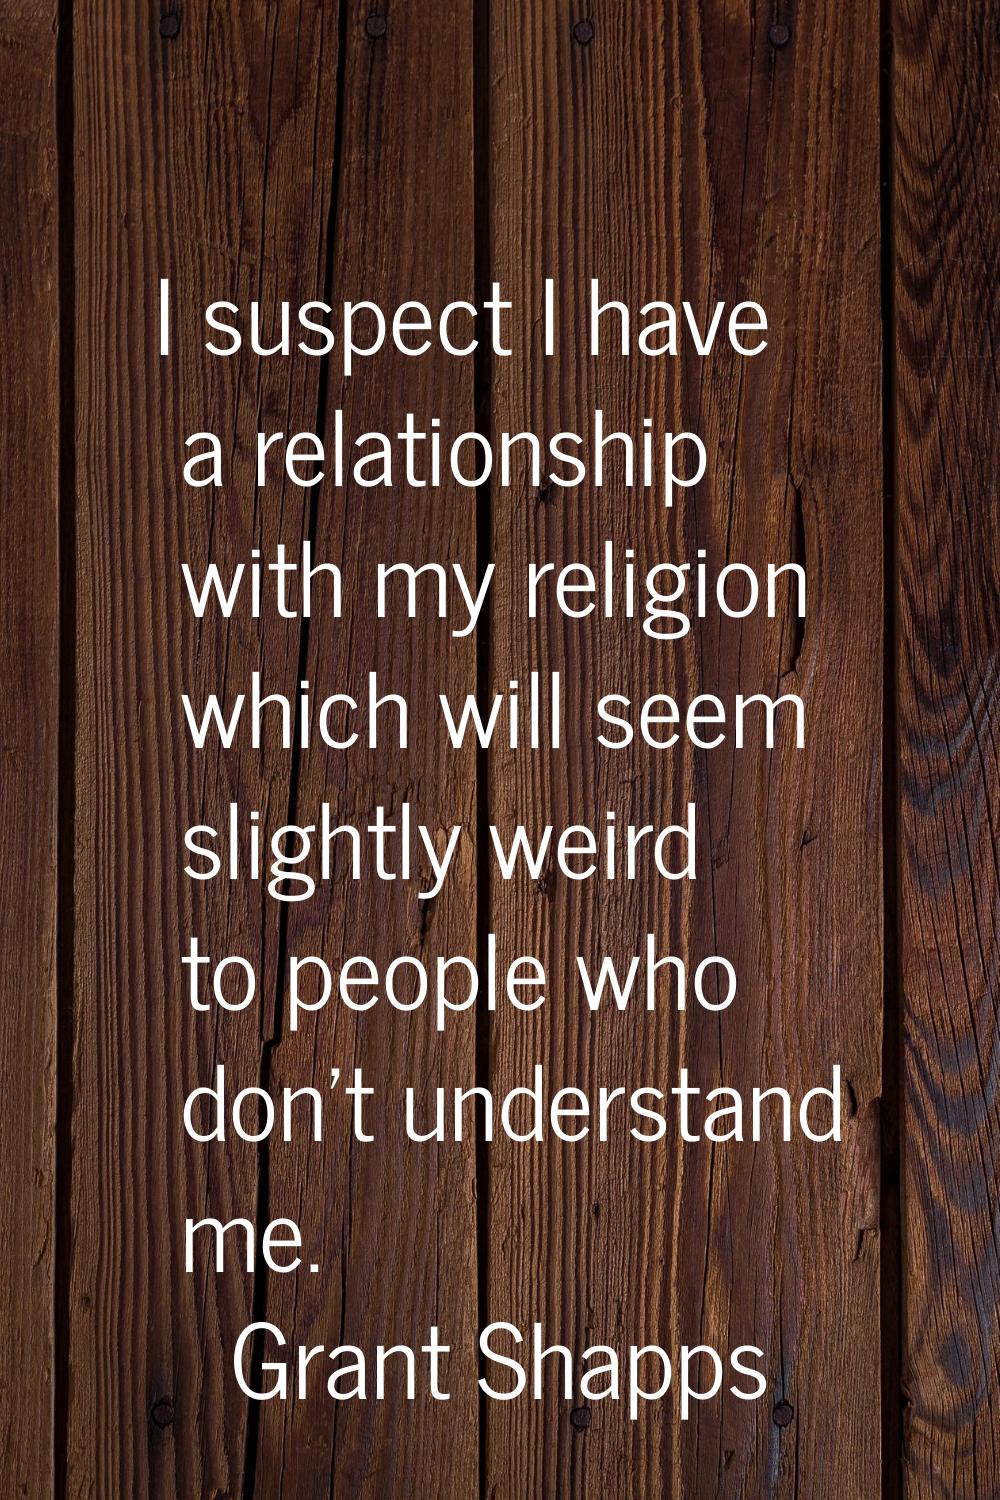 I suspect I have a relationship with my religion which will seem slightly weird to people who don't